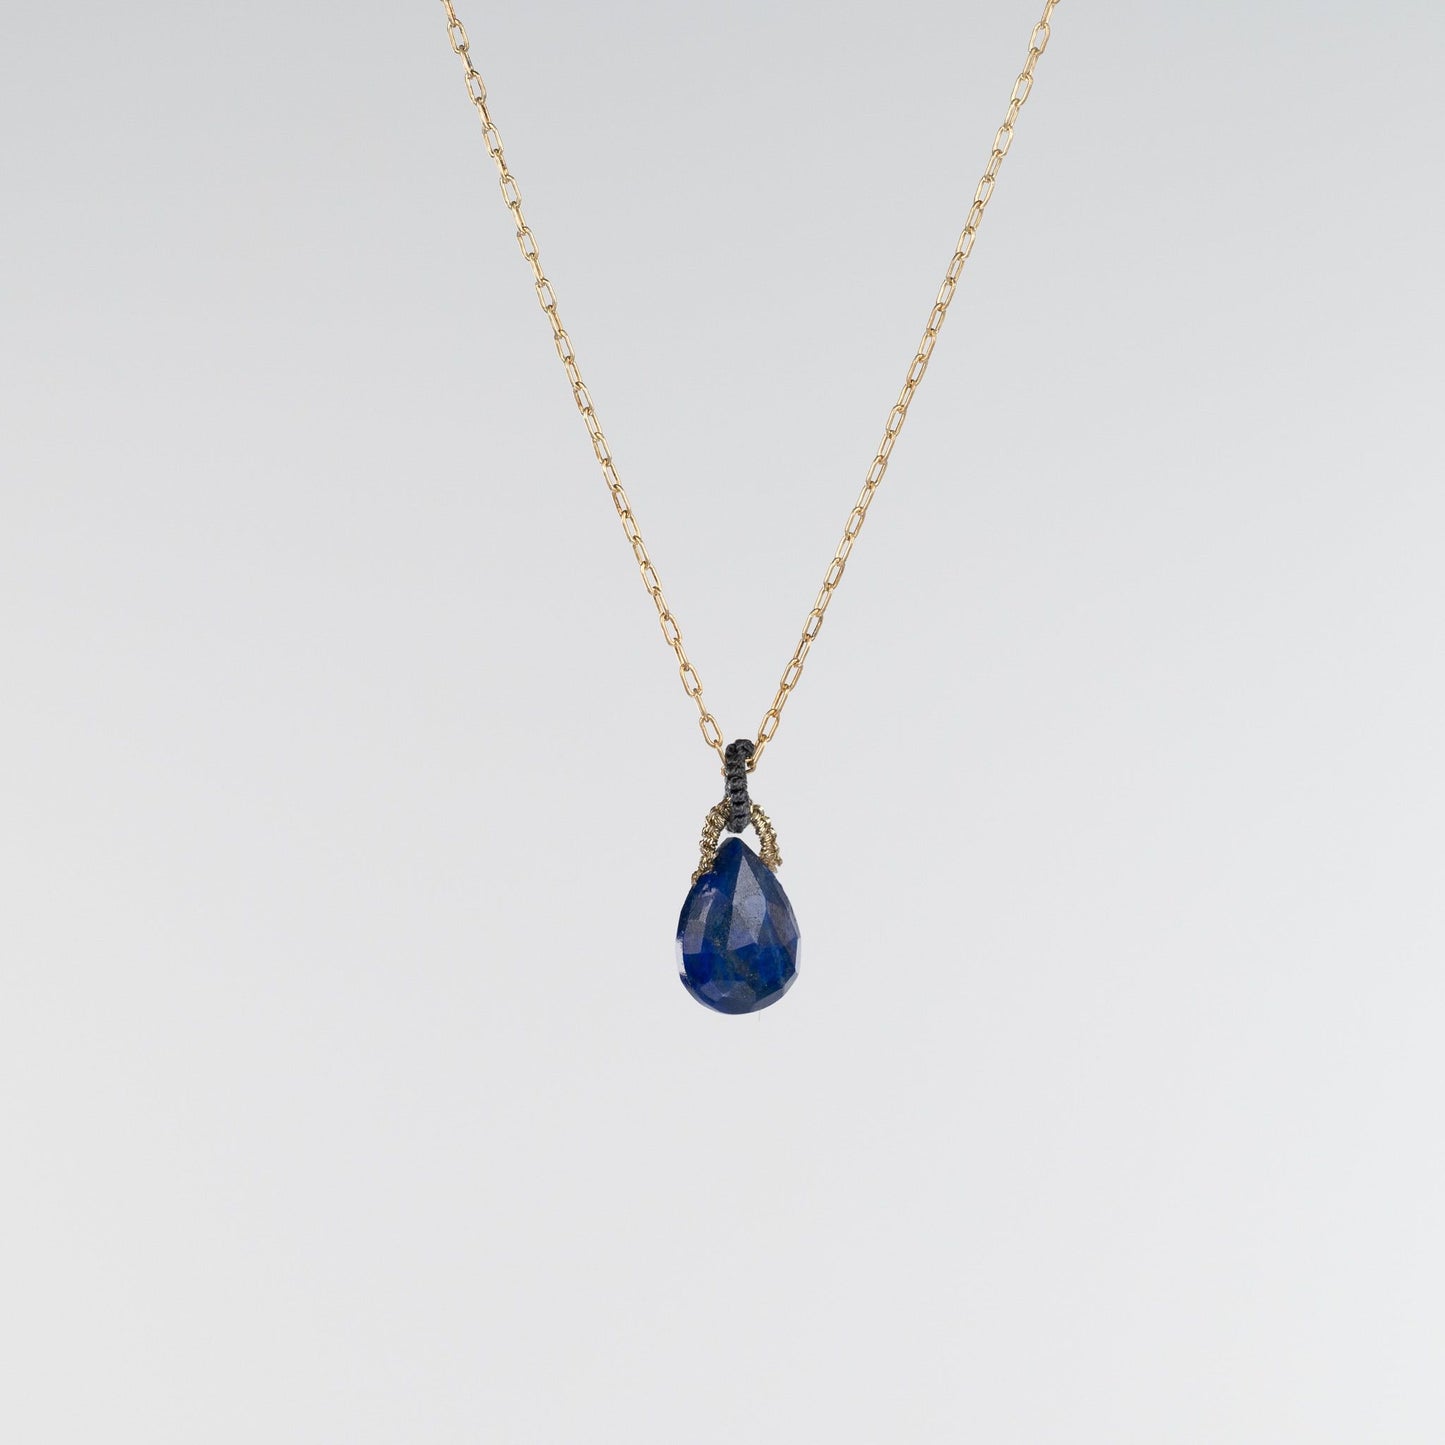 Danielle Welmond Sapphire Drop Necklace with Coordinating Grey Silk Cord